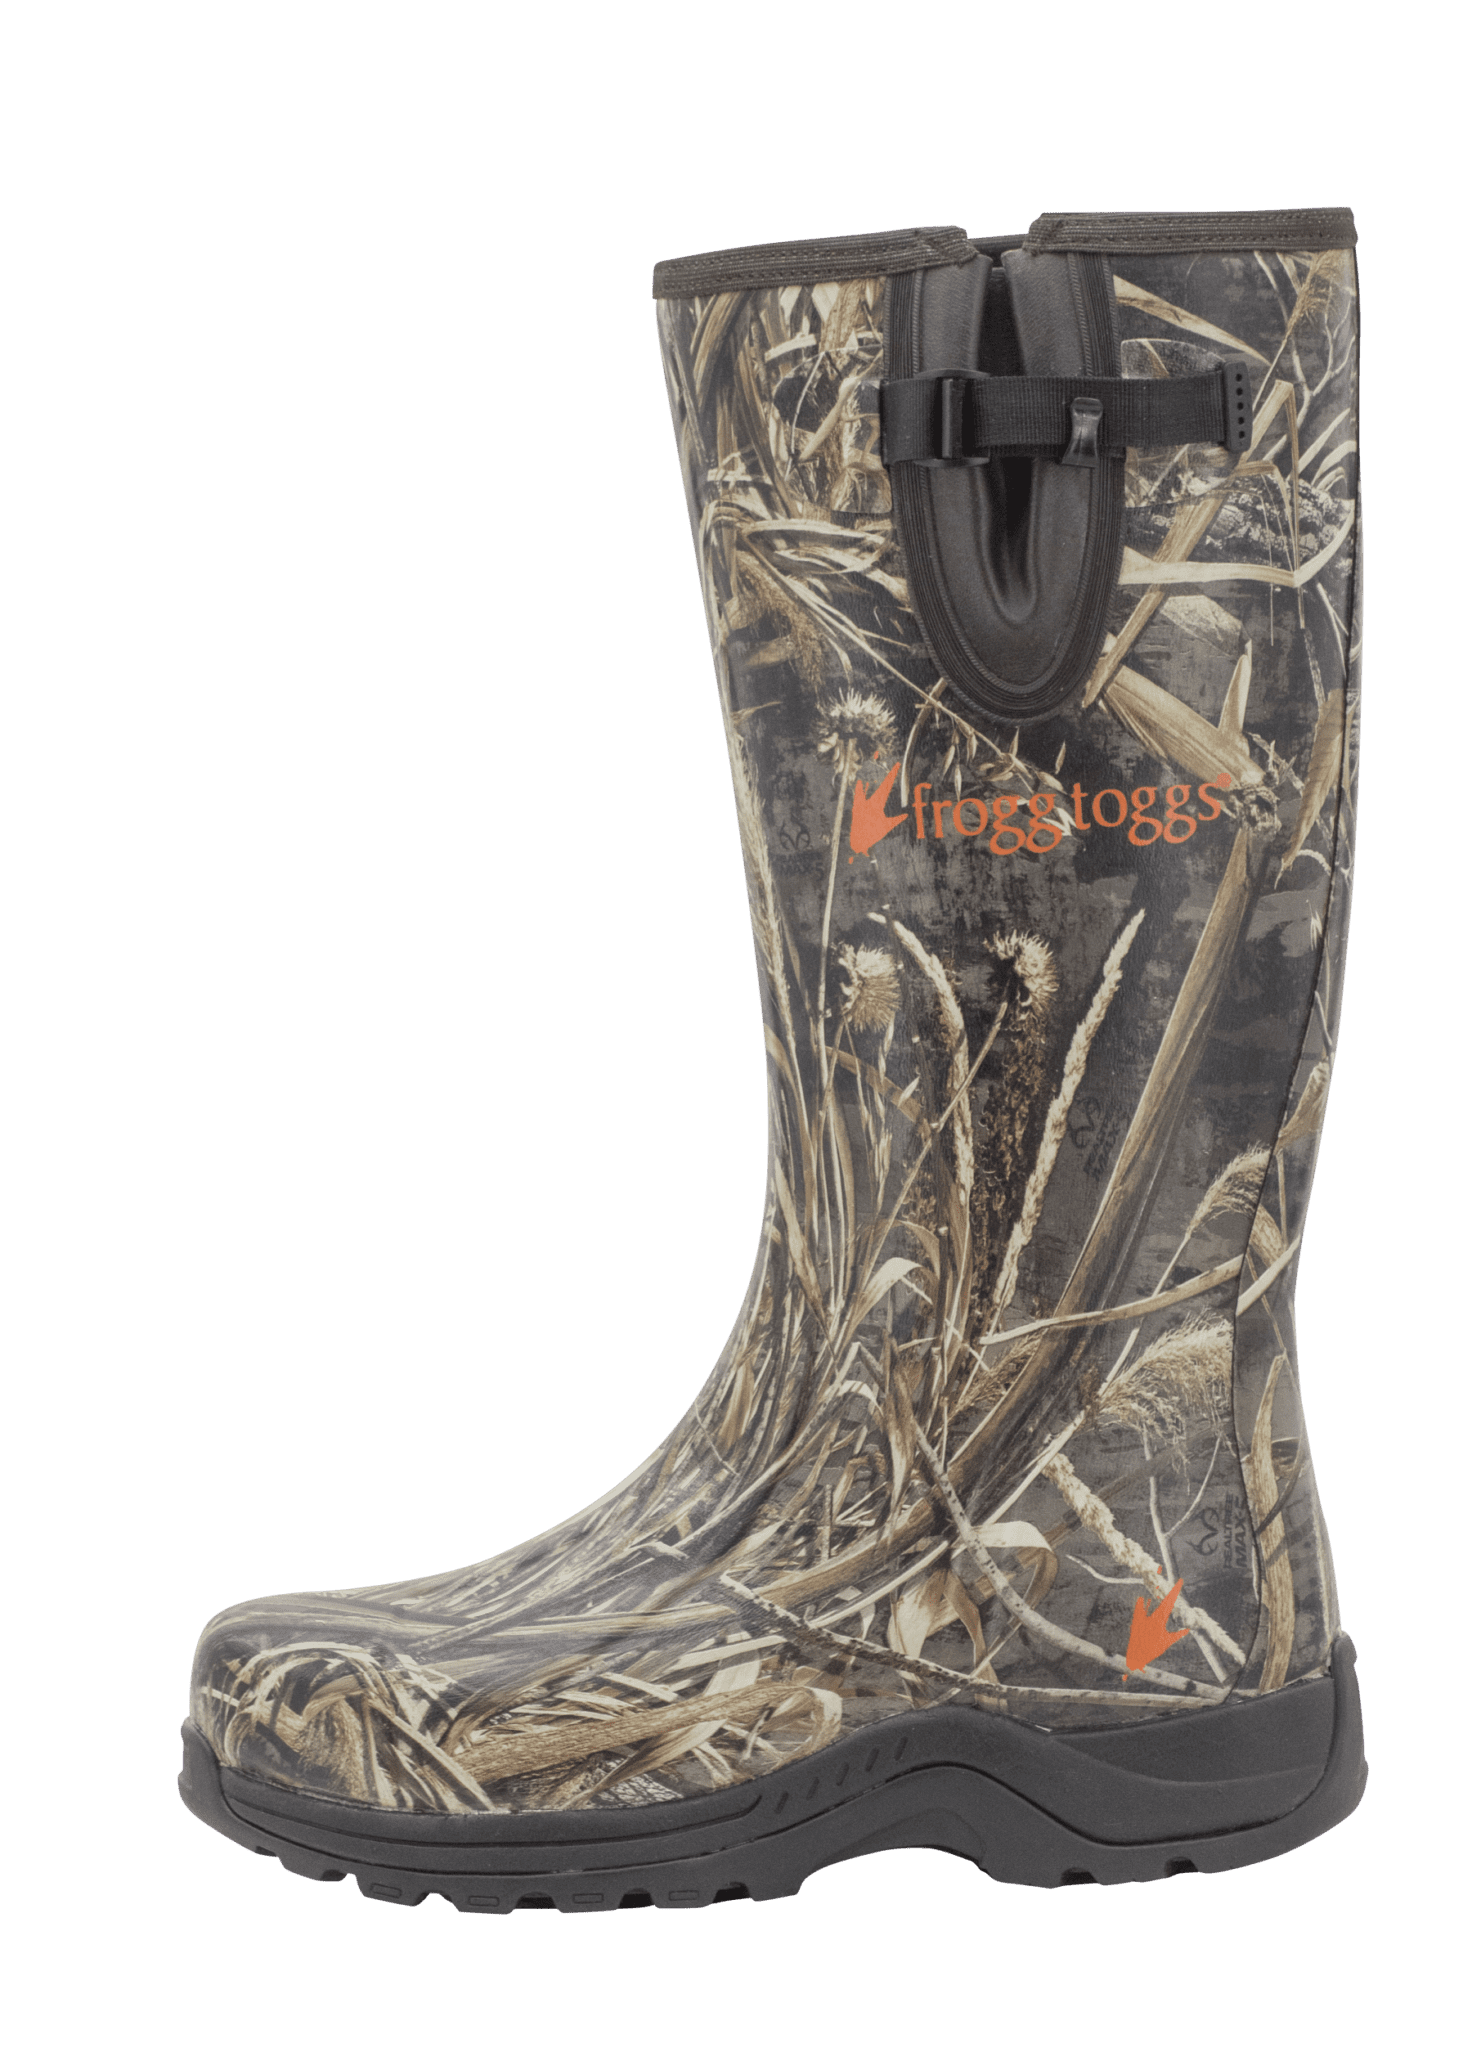 LaCrosse Alphaburly Pro - OPTIFADE Elevated II Boot Review | Bowhunting.com